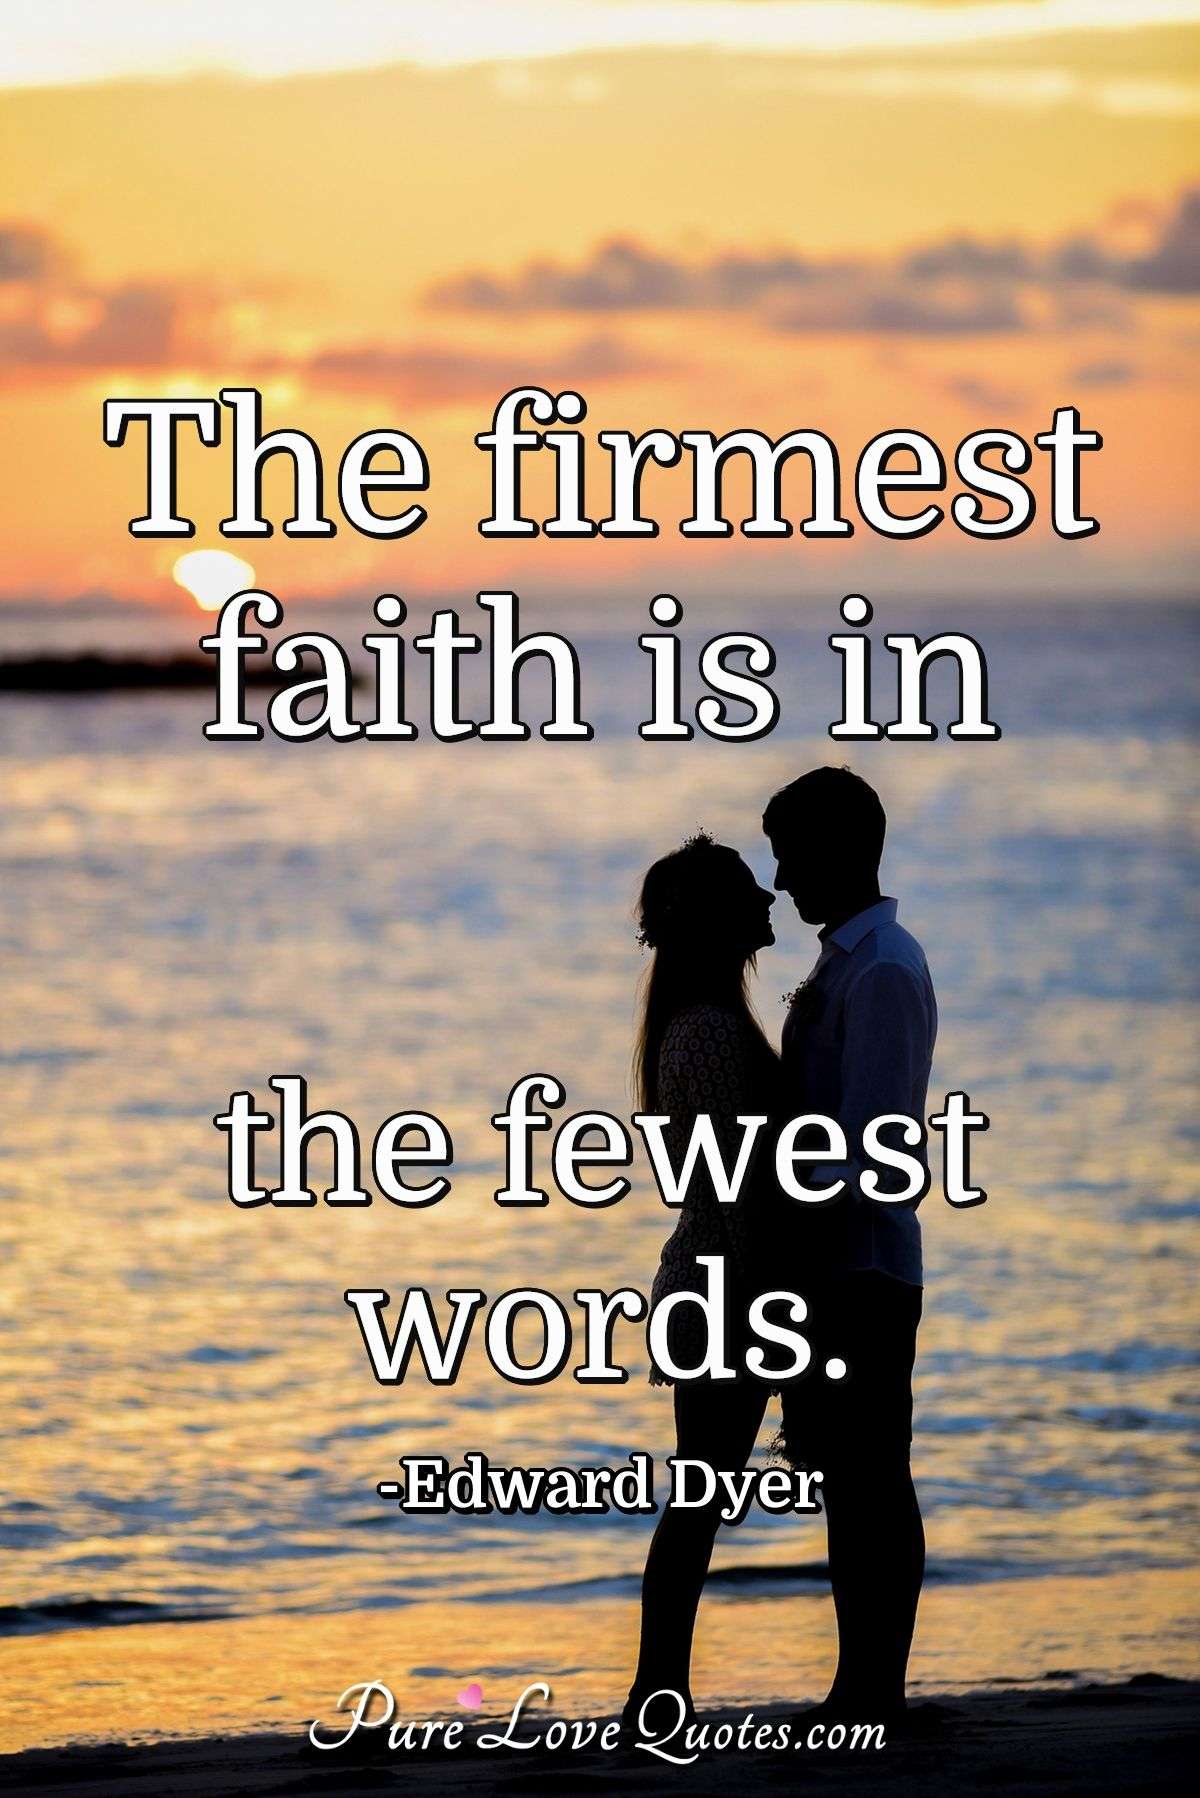 The firmest faith is in the fewest words. - Edward Dyer